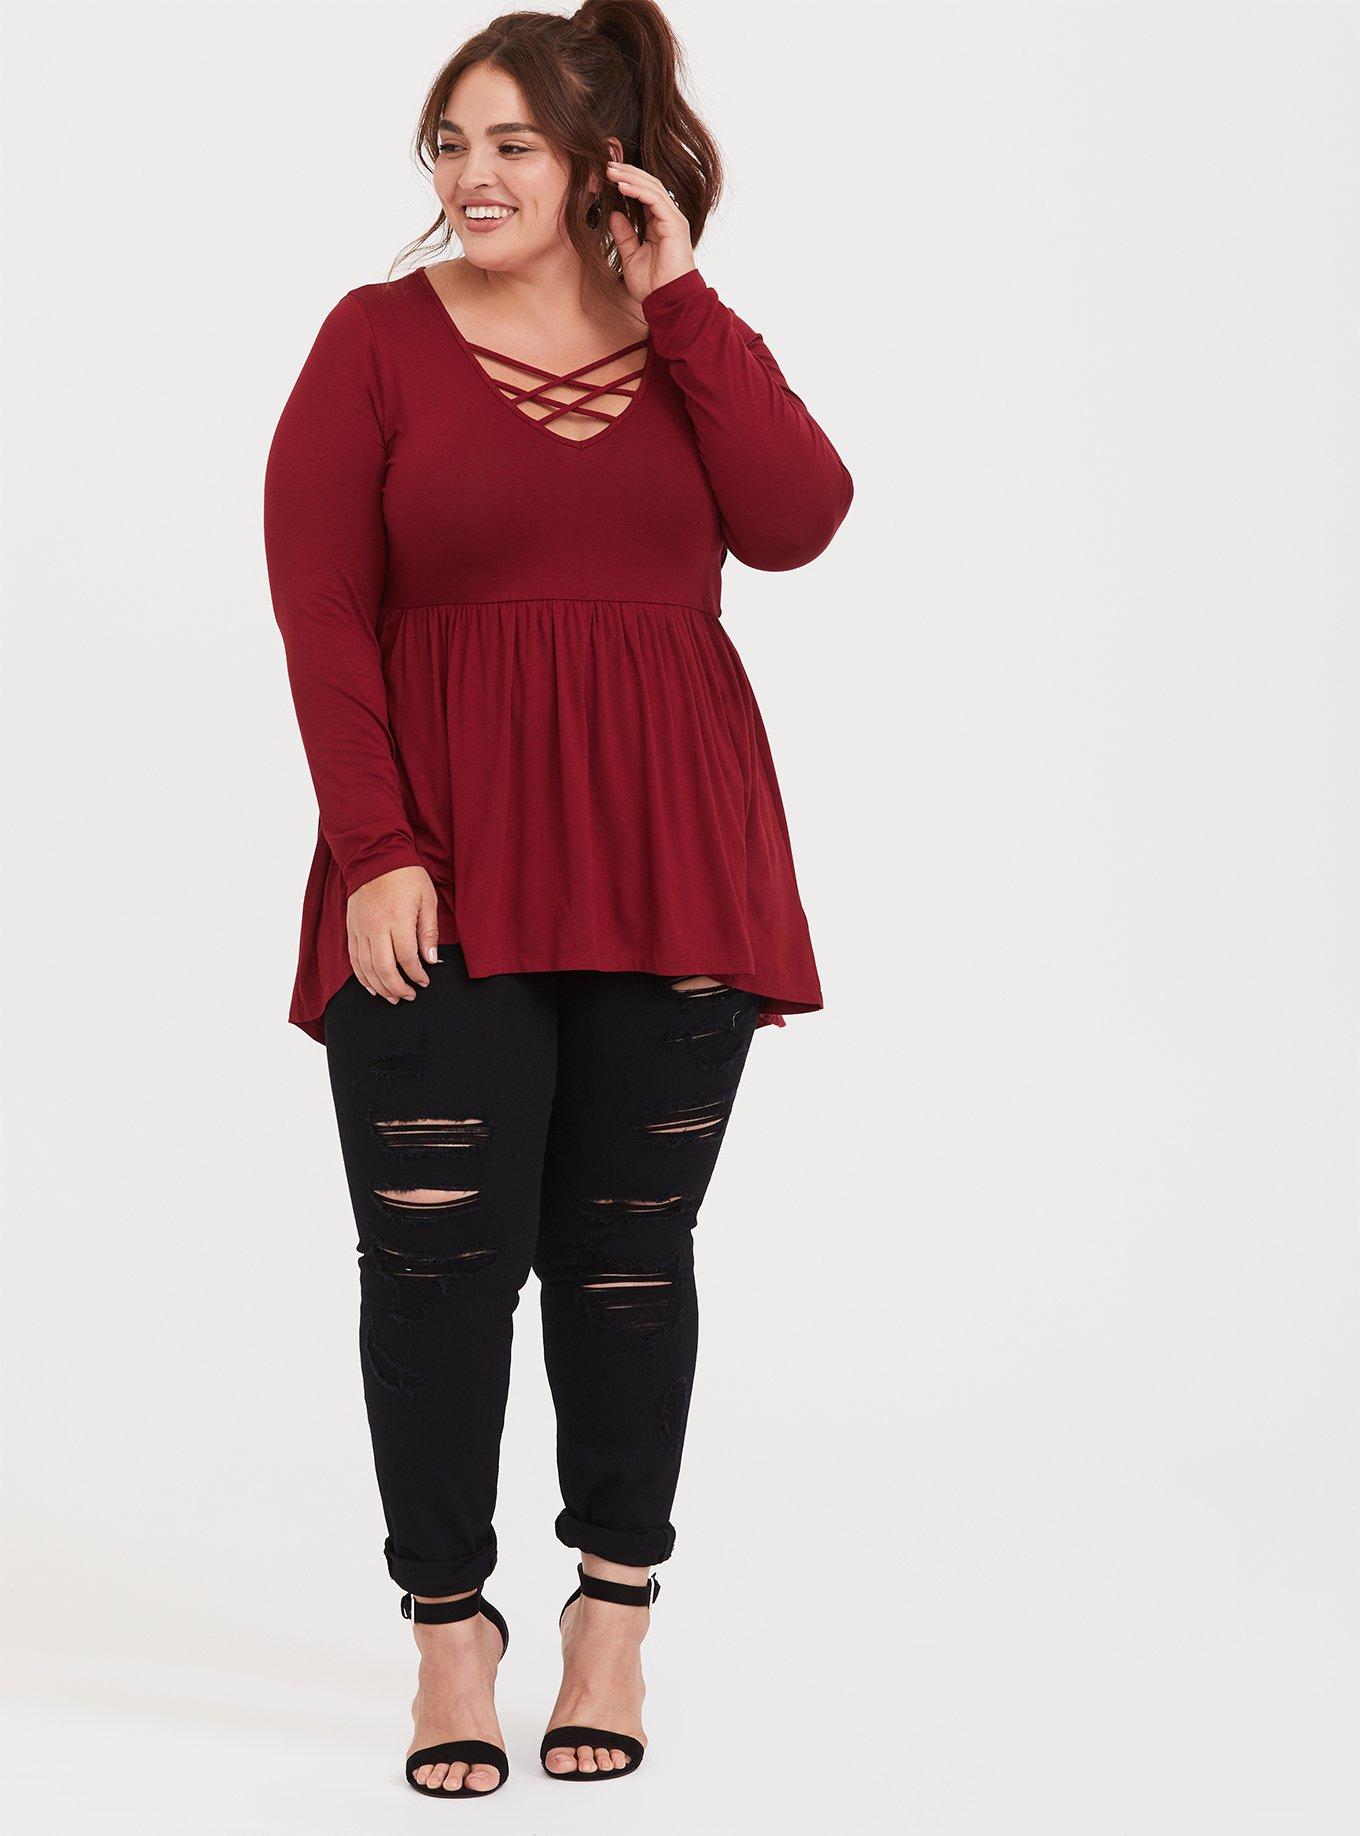 Women's Plus Size All Over Lace Long Sleeves Teddy #1103X